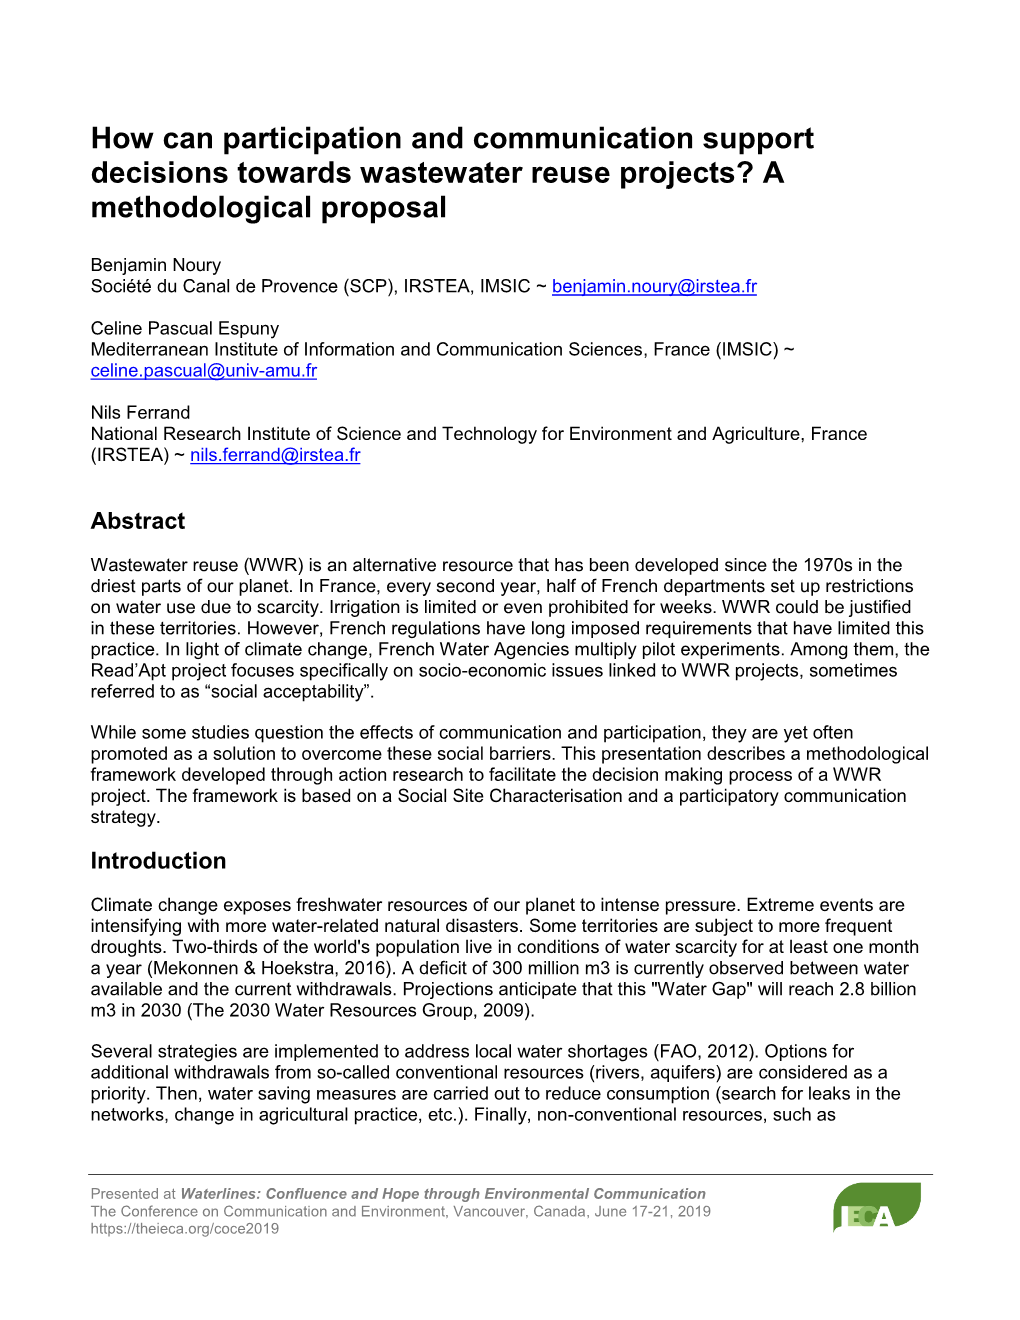 How Can Participation and Communication Support Decisions Towards Wastewater Reuse Projects? a Methodological Proposal